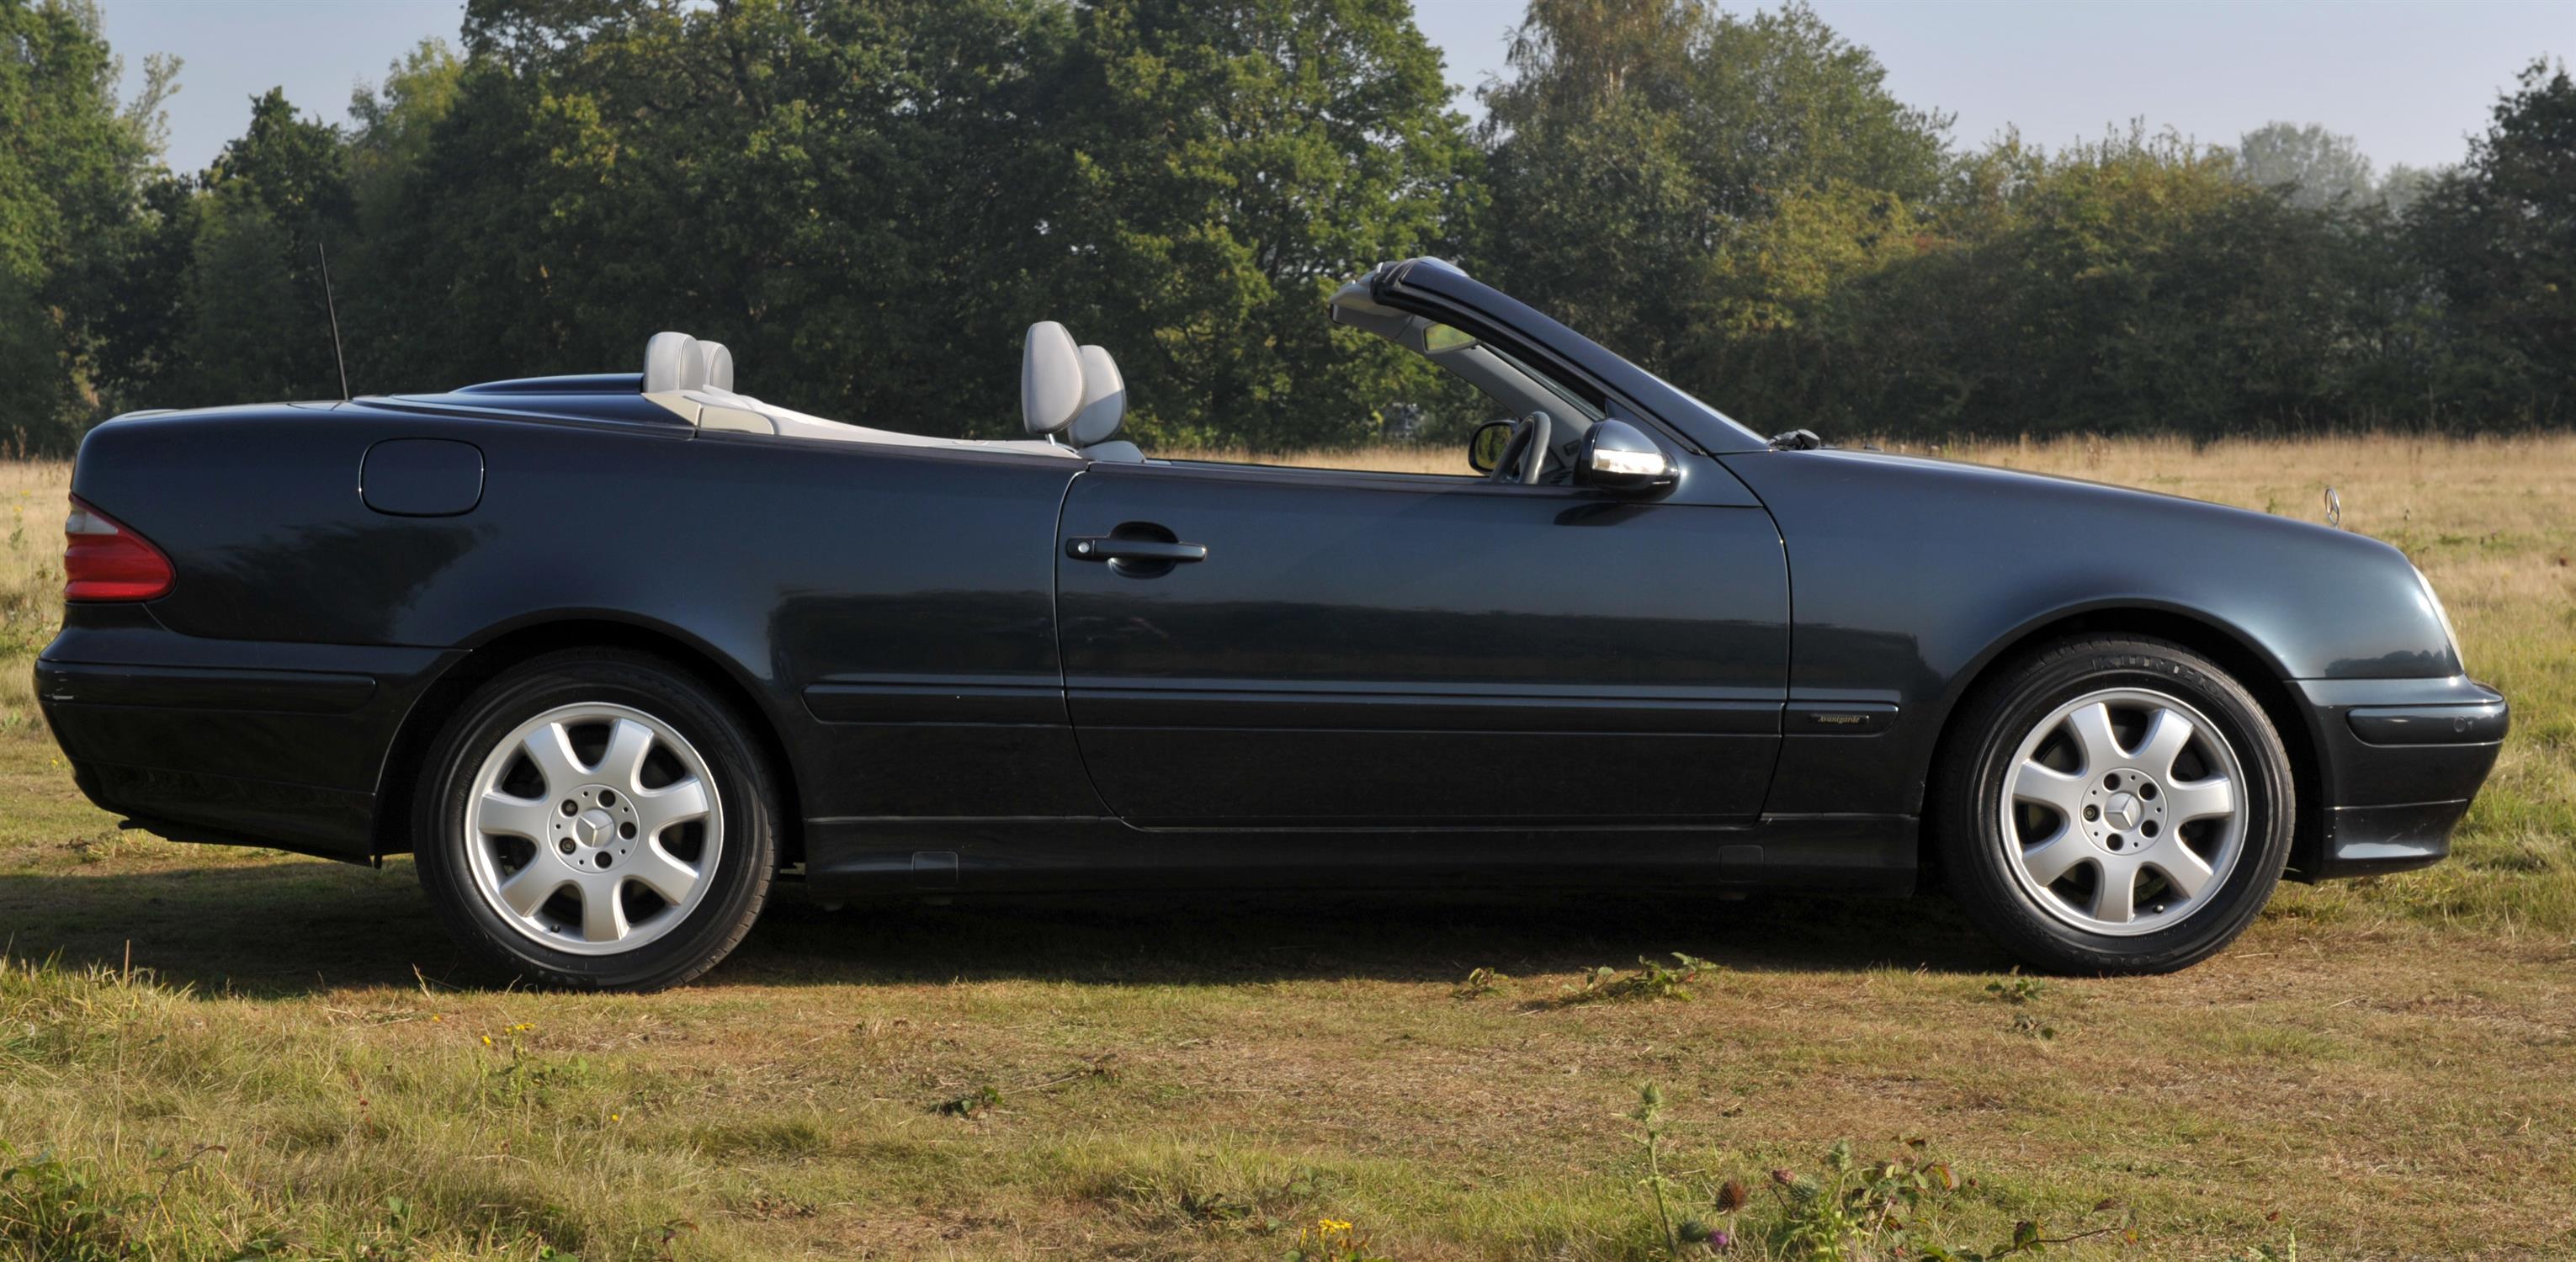 2001 Mercedes CLK 200 Petrol Convertible Automatic. Registration number: Y702 HAP. - Image 18 of 21